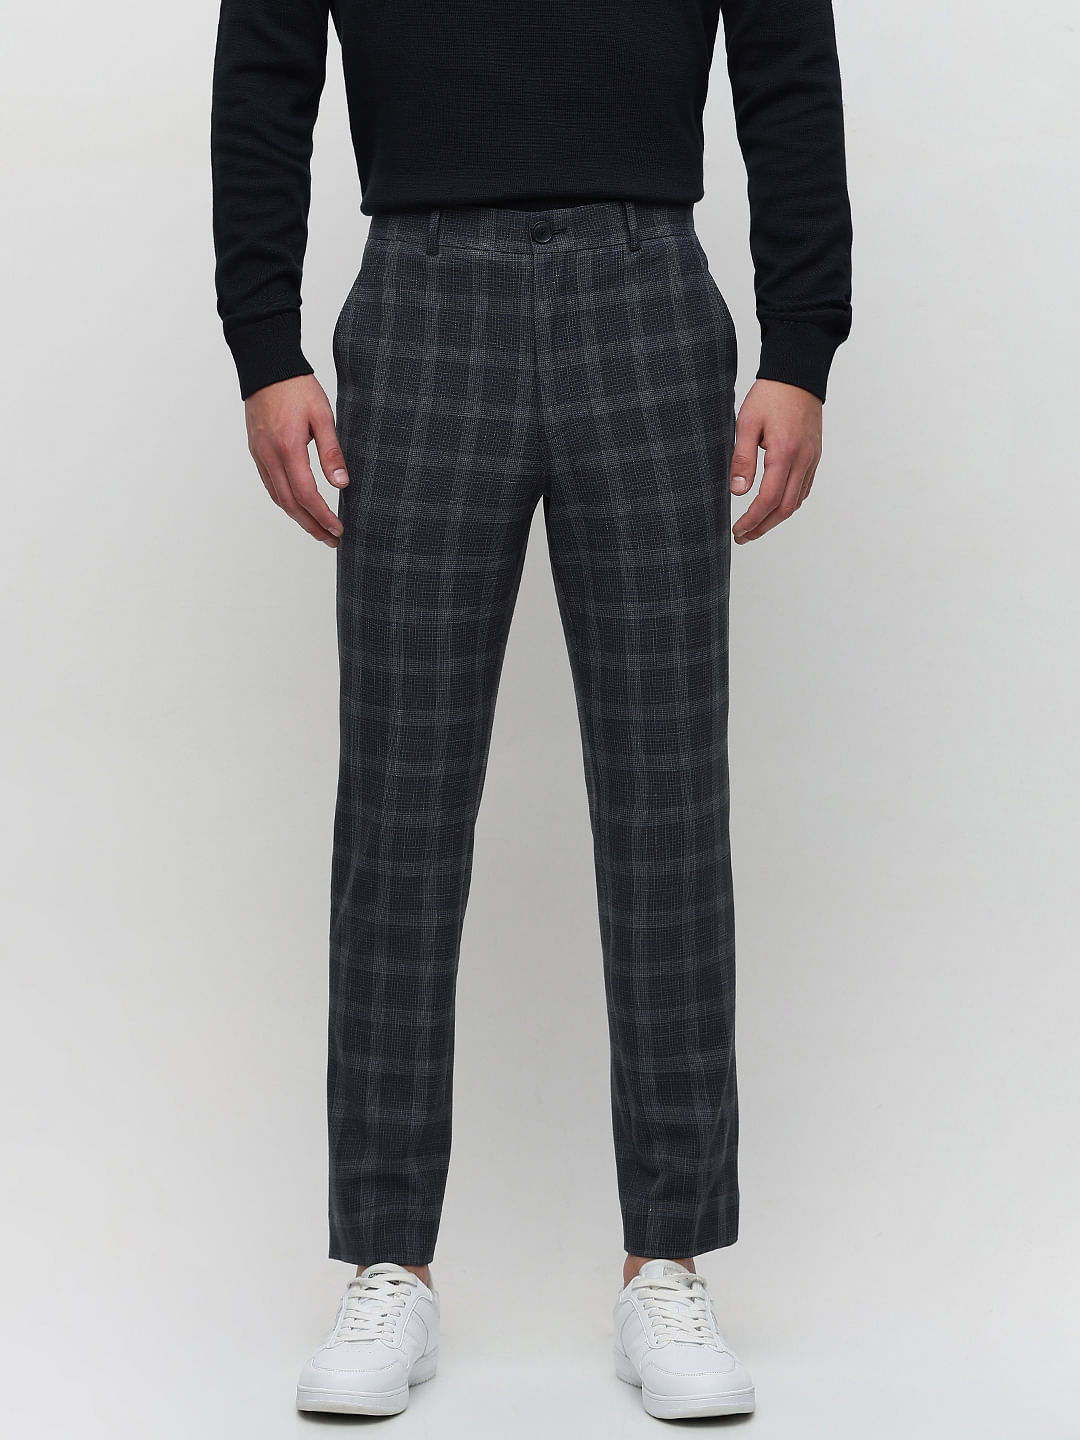 Buy Peter England Men Grey Check Carrot Fit Trousers online